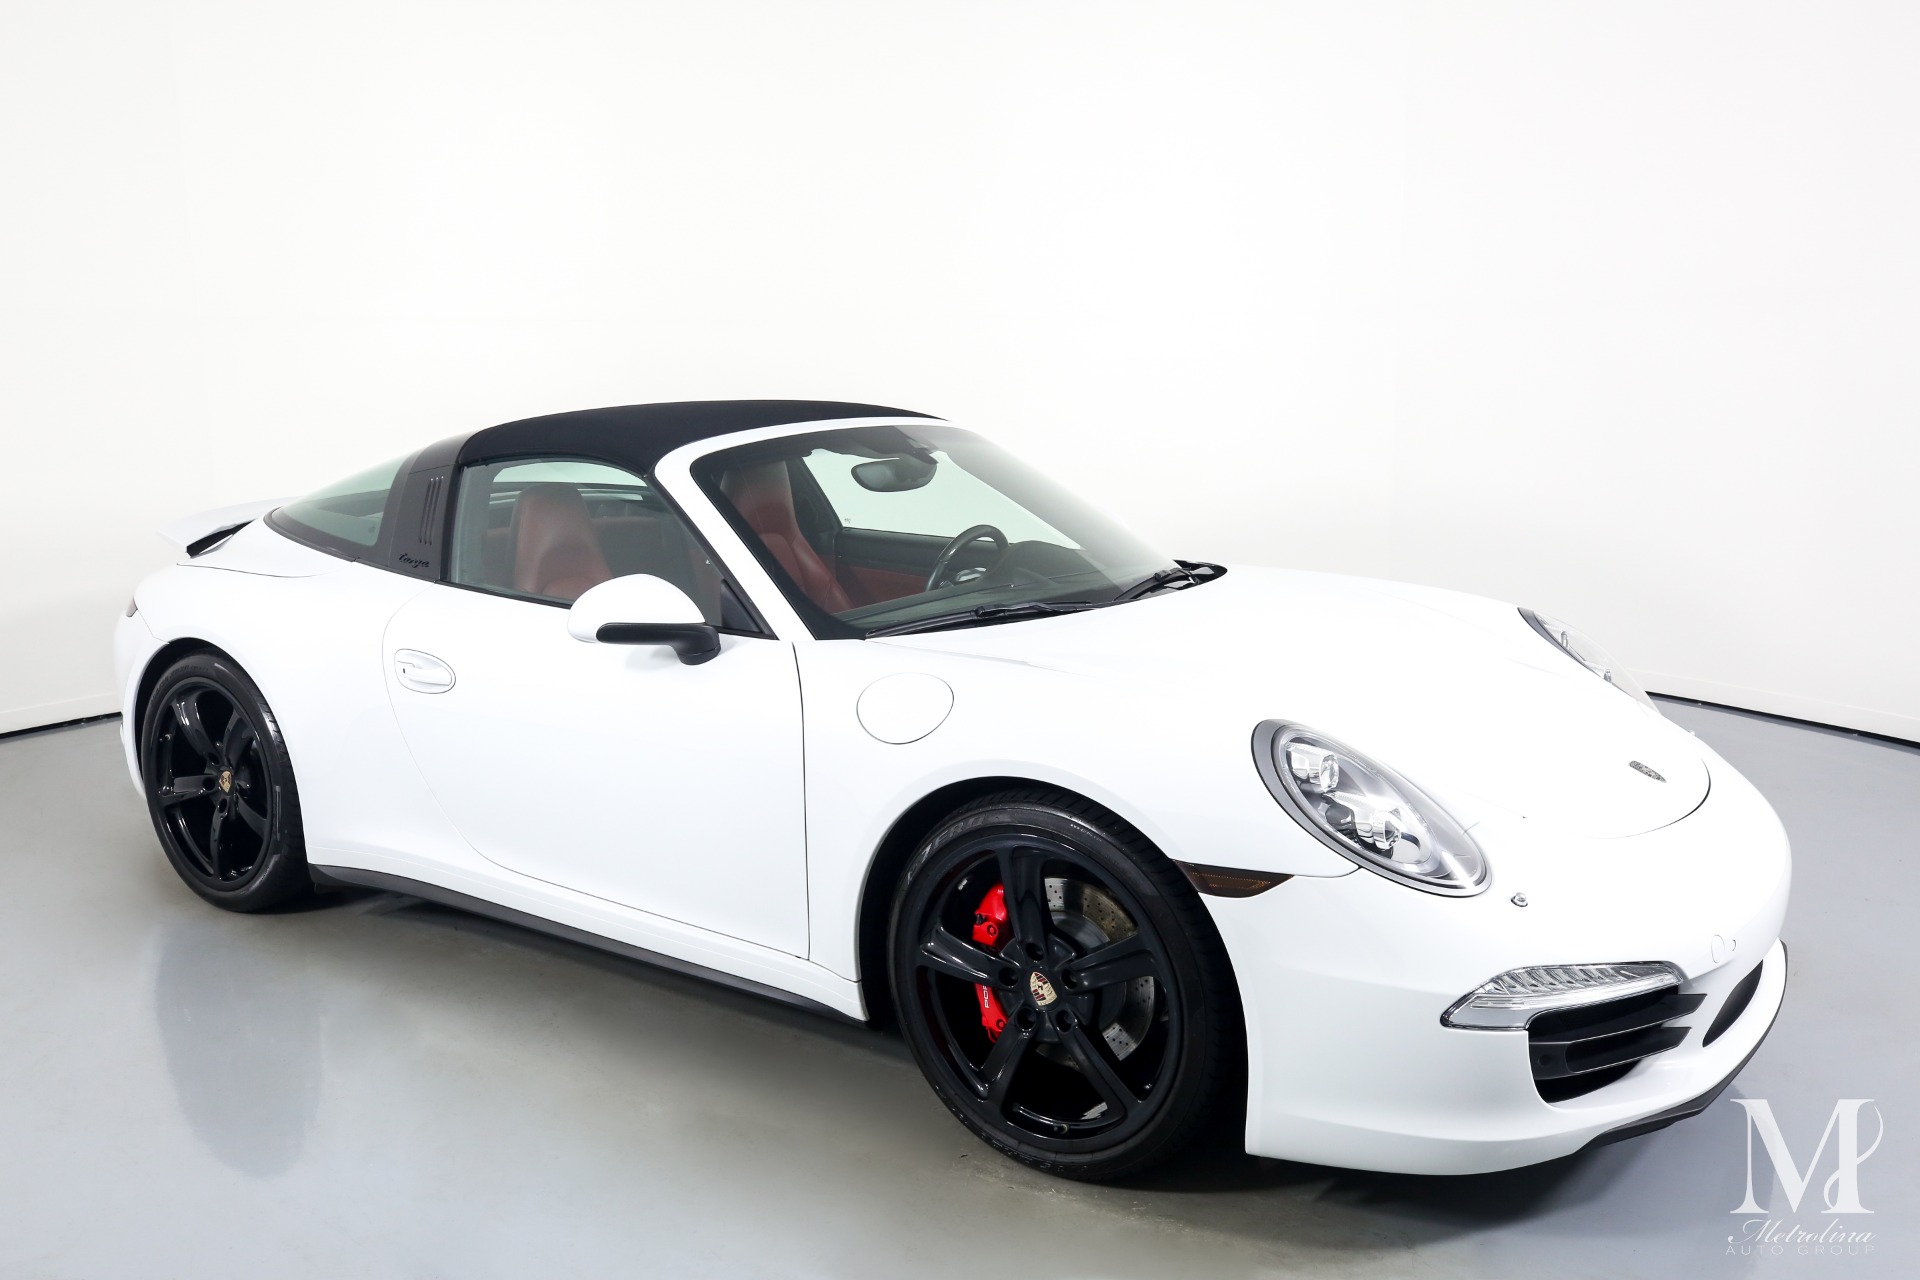 Used 2015 Porsche 911 Targa 4S for sale $112,375 at Metrolina Auto Group in Charlotte NC 28217 - 2